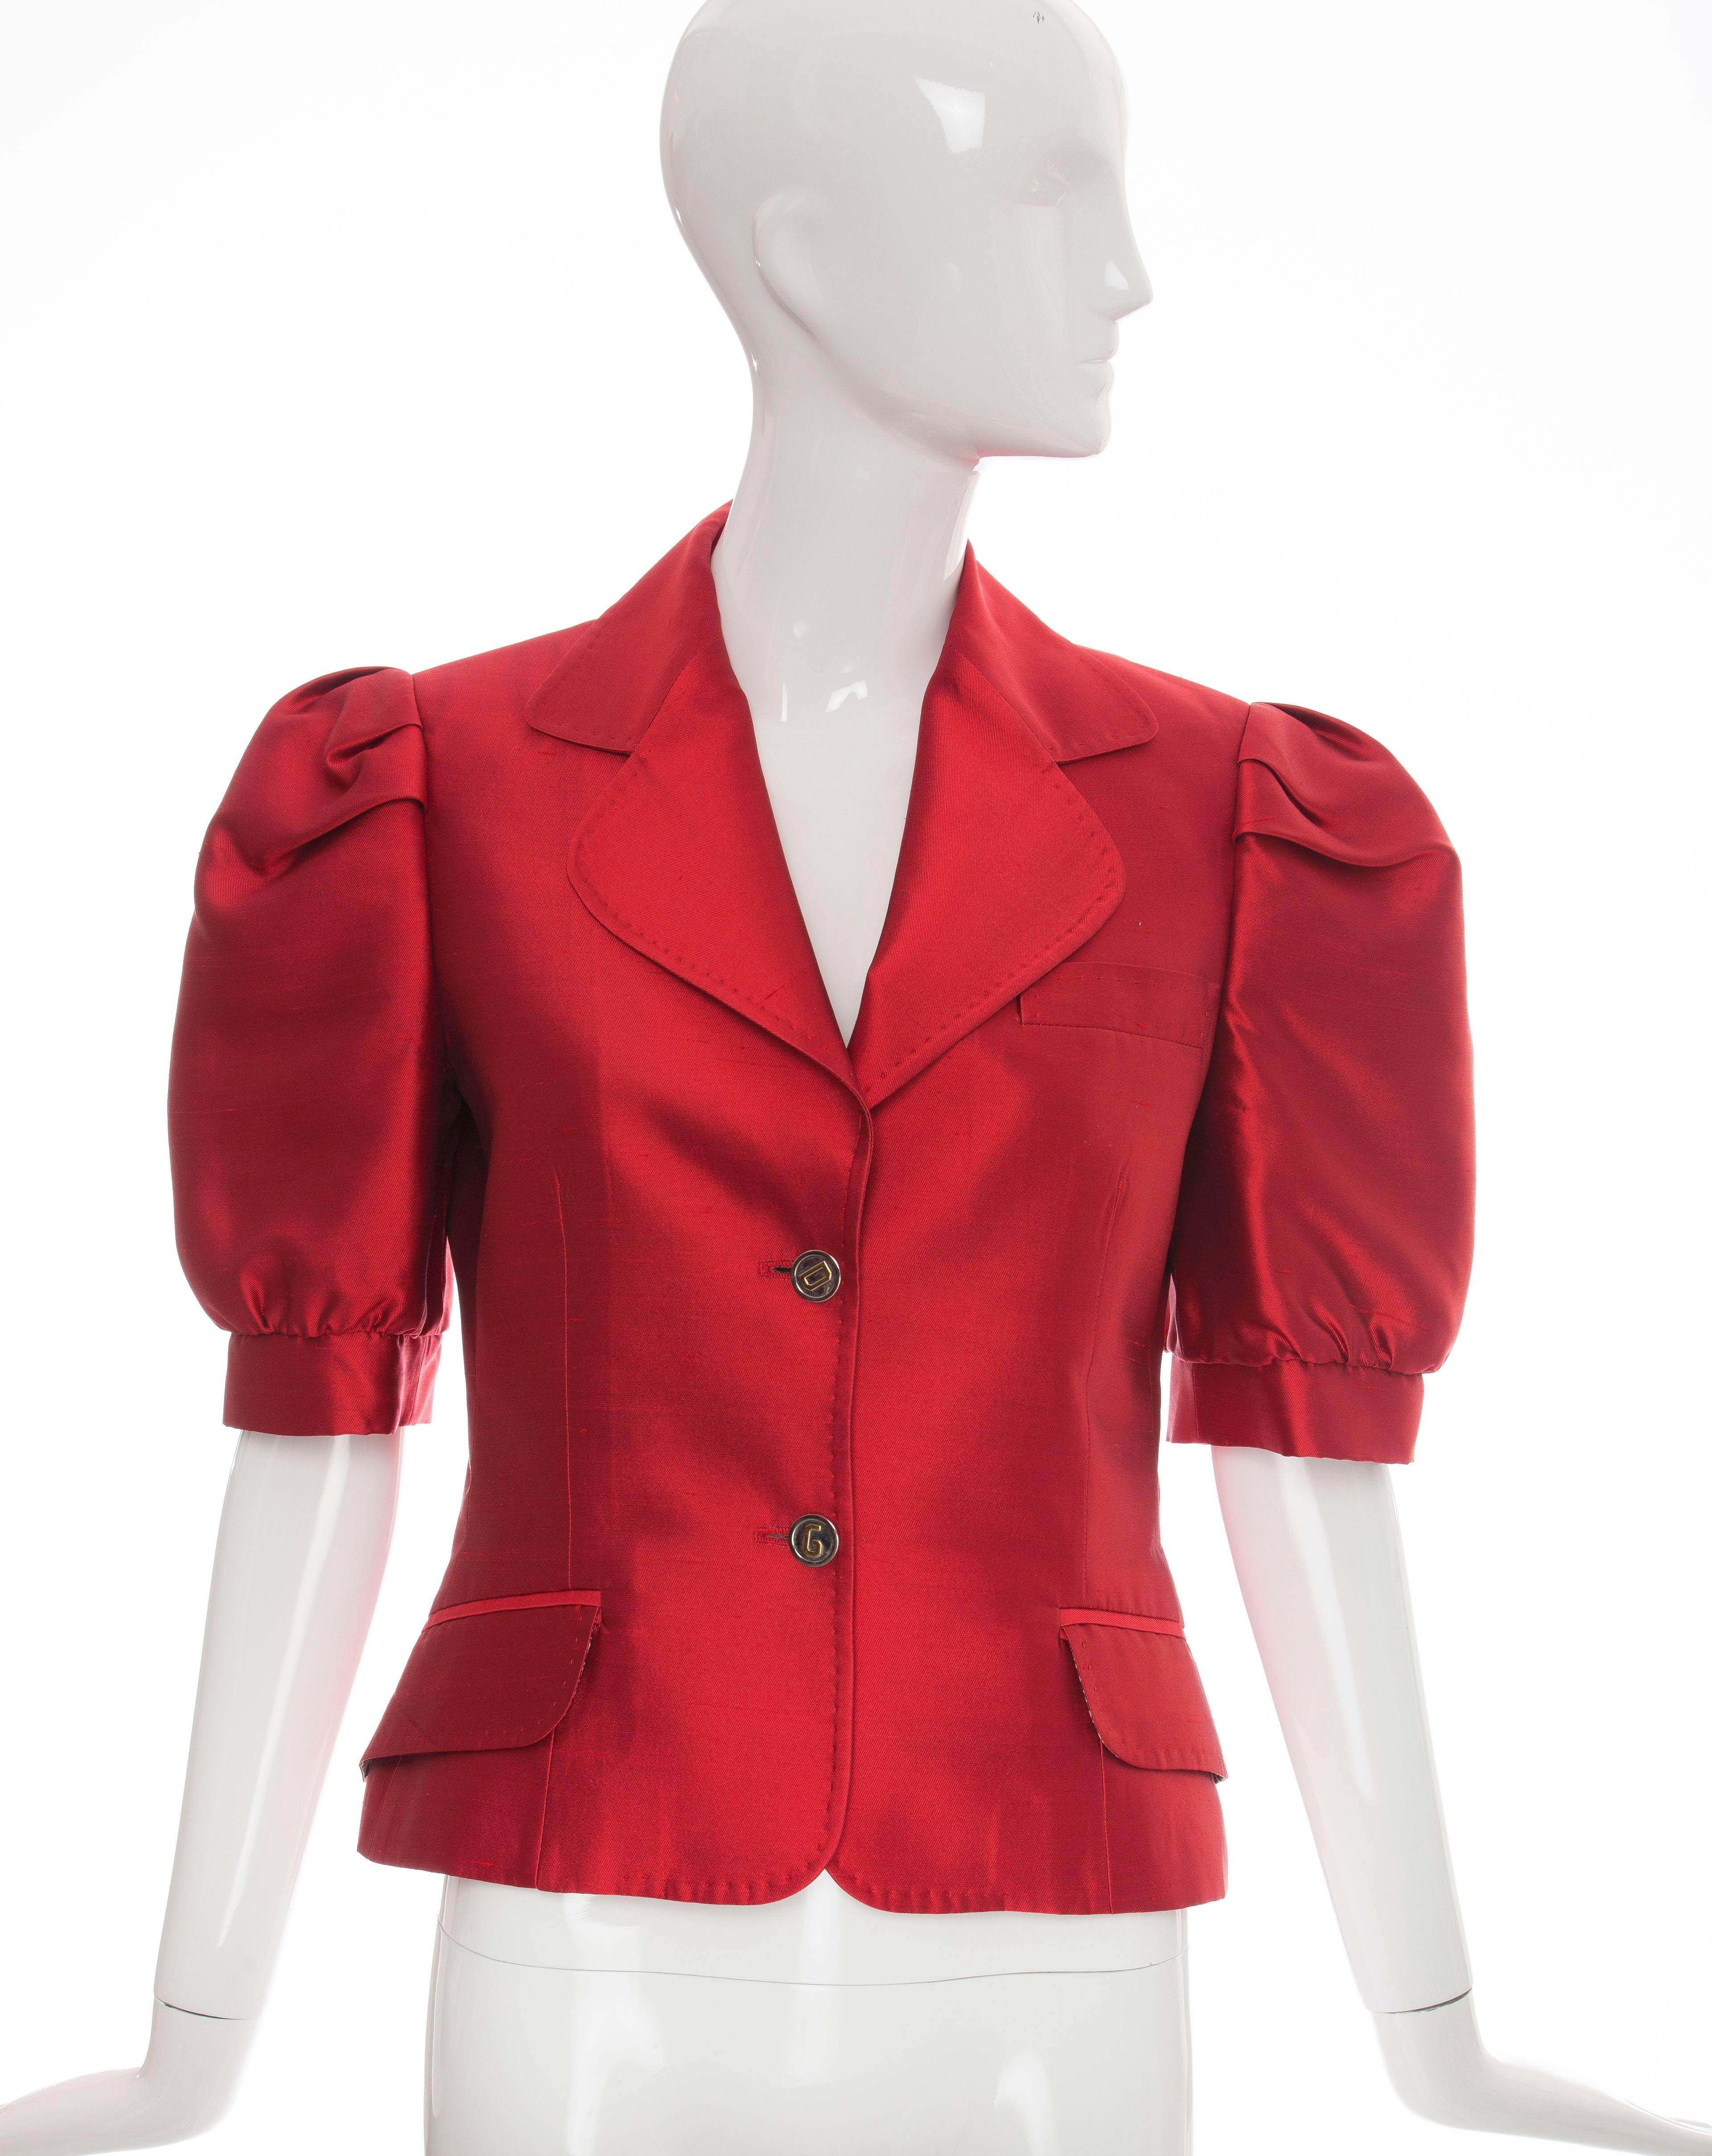 Dolce & Gabbana, Spring 2005, red silk short sleeve jacket,three faux pockets and fully lined with leopard print.